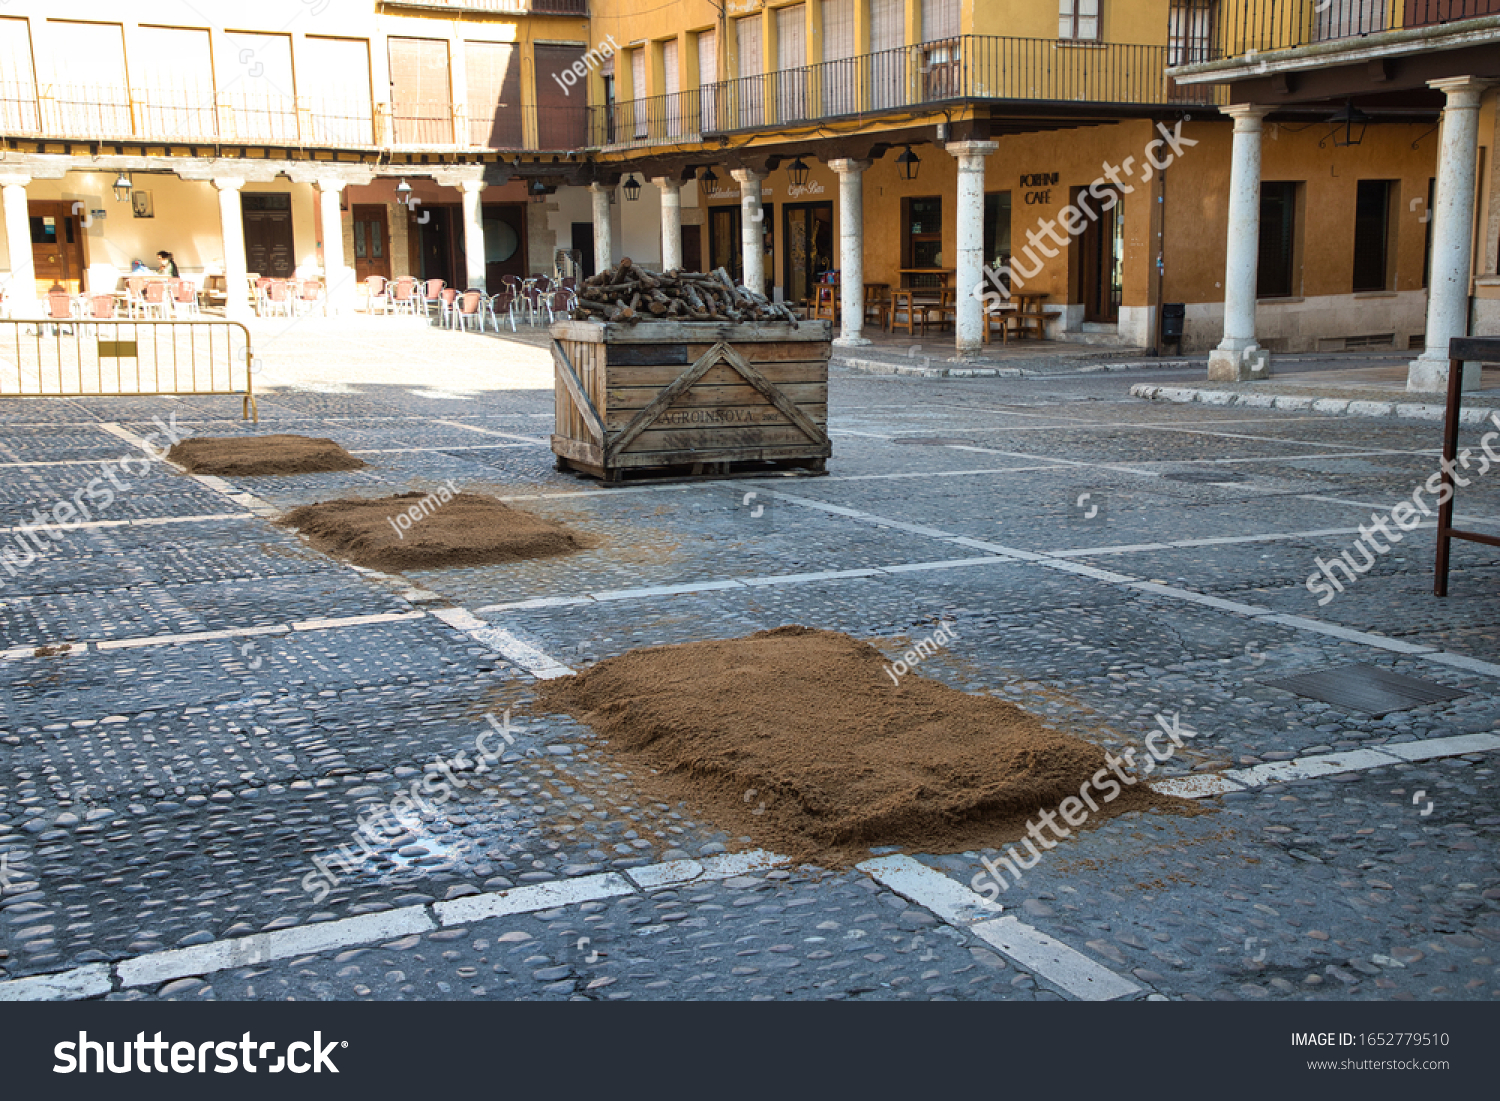 Processing under squares of sand in Tordesillas Spain #1652779510